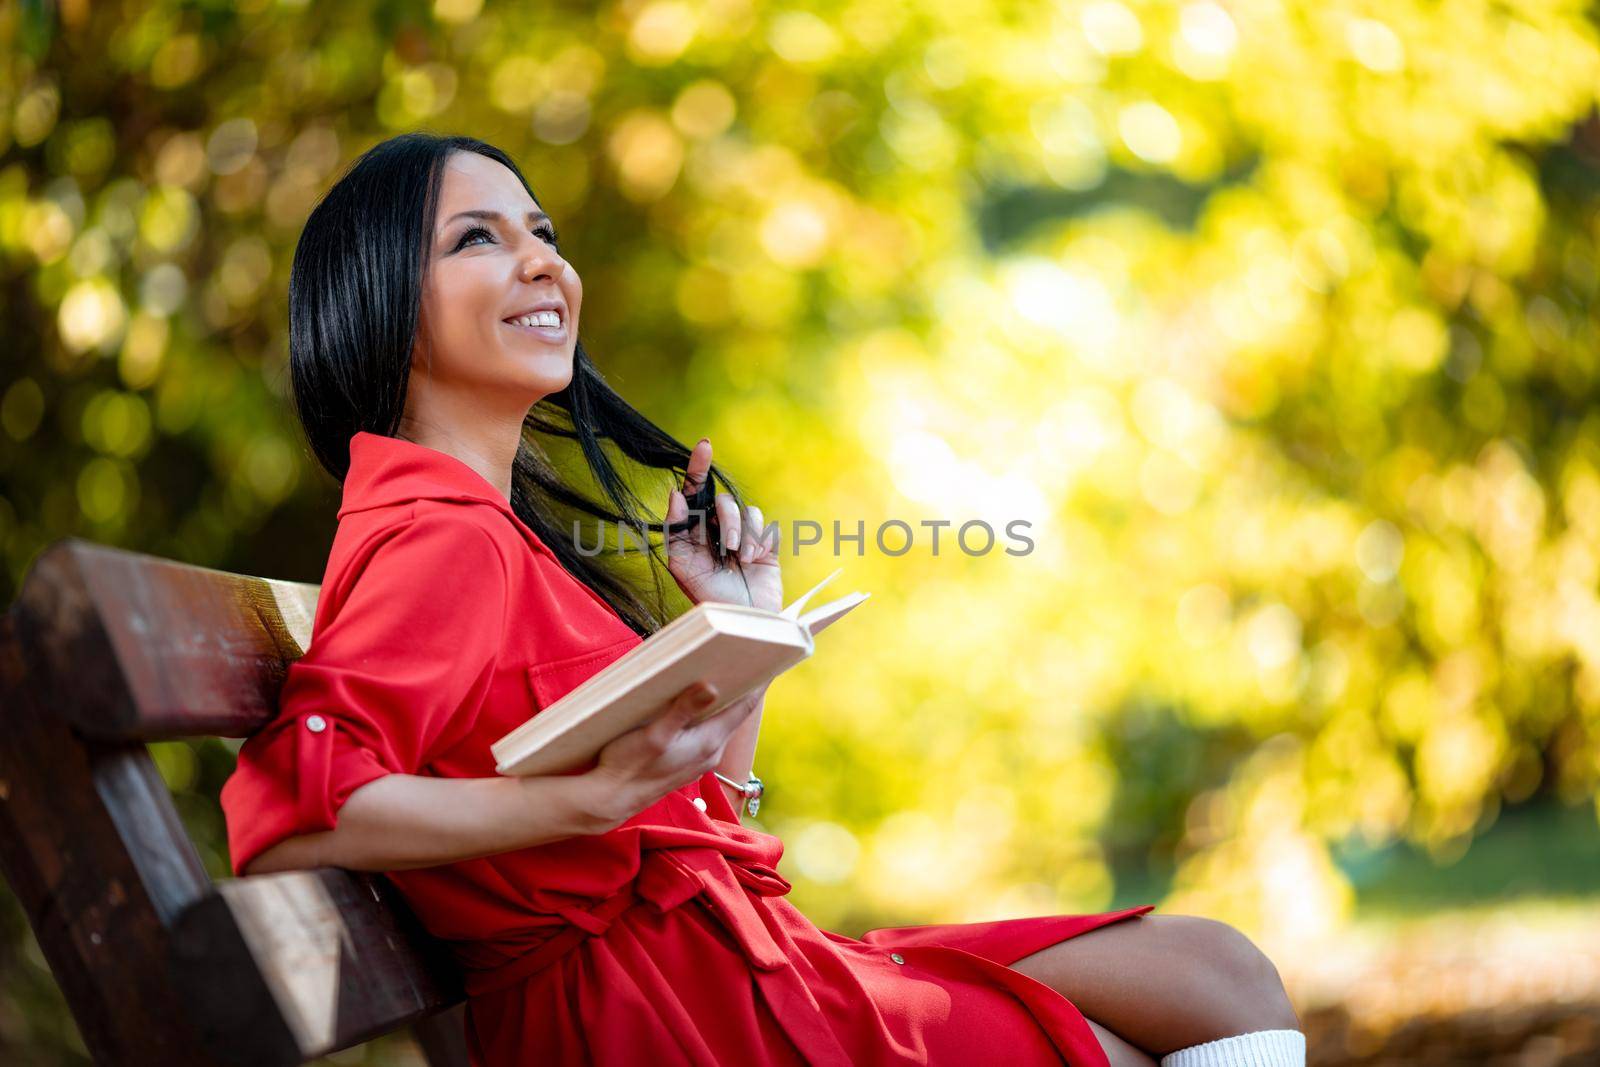 Beautiful young woman enjoying in spring colors sunny forest looking away and holding a book in her hand.  